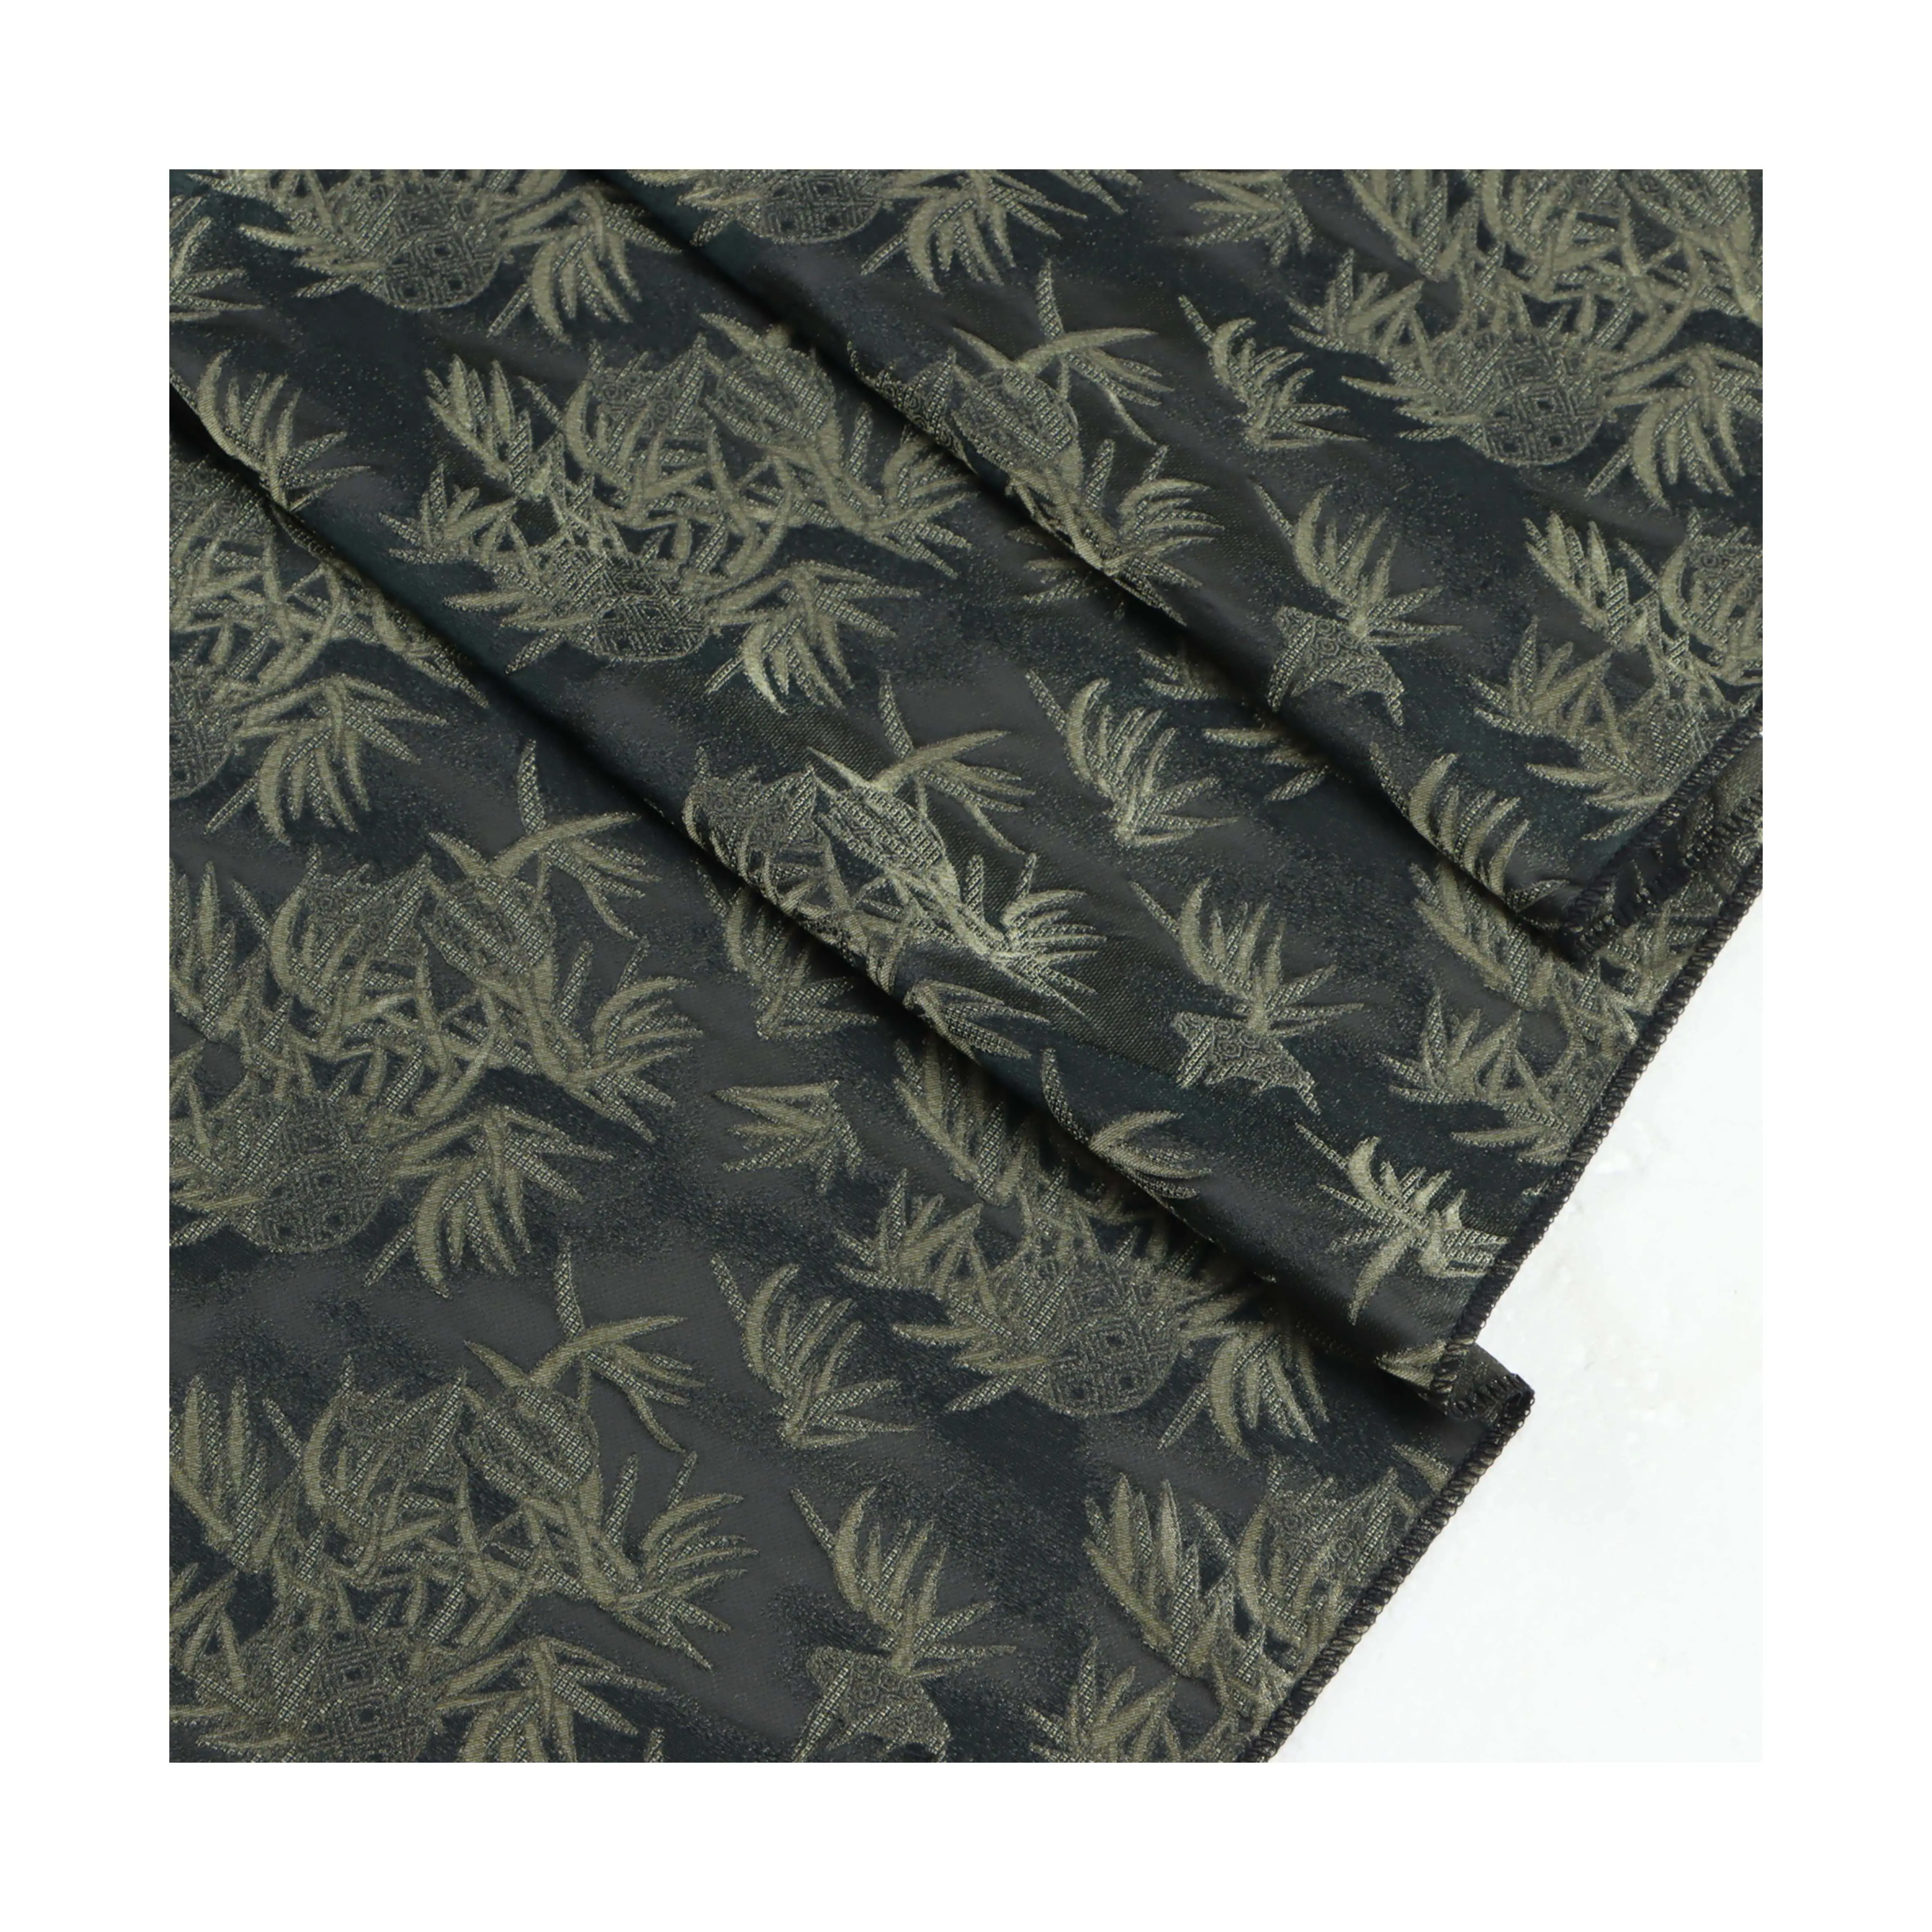 Dark Green New Arrivals 100polyester Fabric Textile Material Wholesale 63" 103GSM Bamboo Leaf Pattern Jacquard Fabric For Shirt